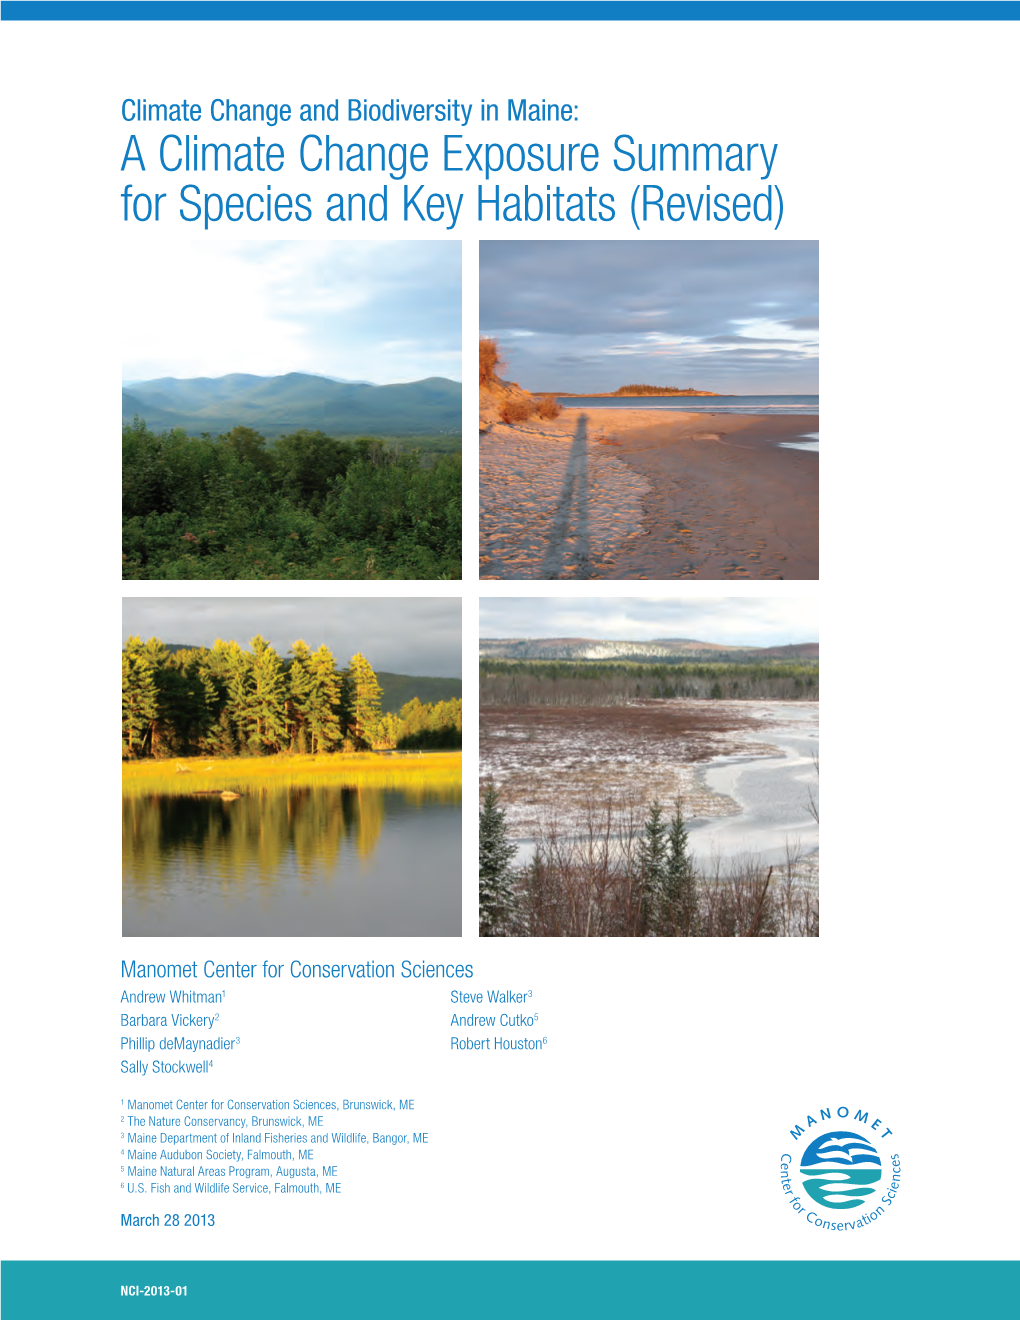 A Climate Change Exposure Summary for Species and Key Habitats (Revised)